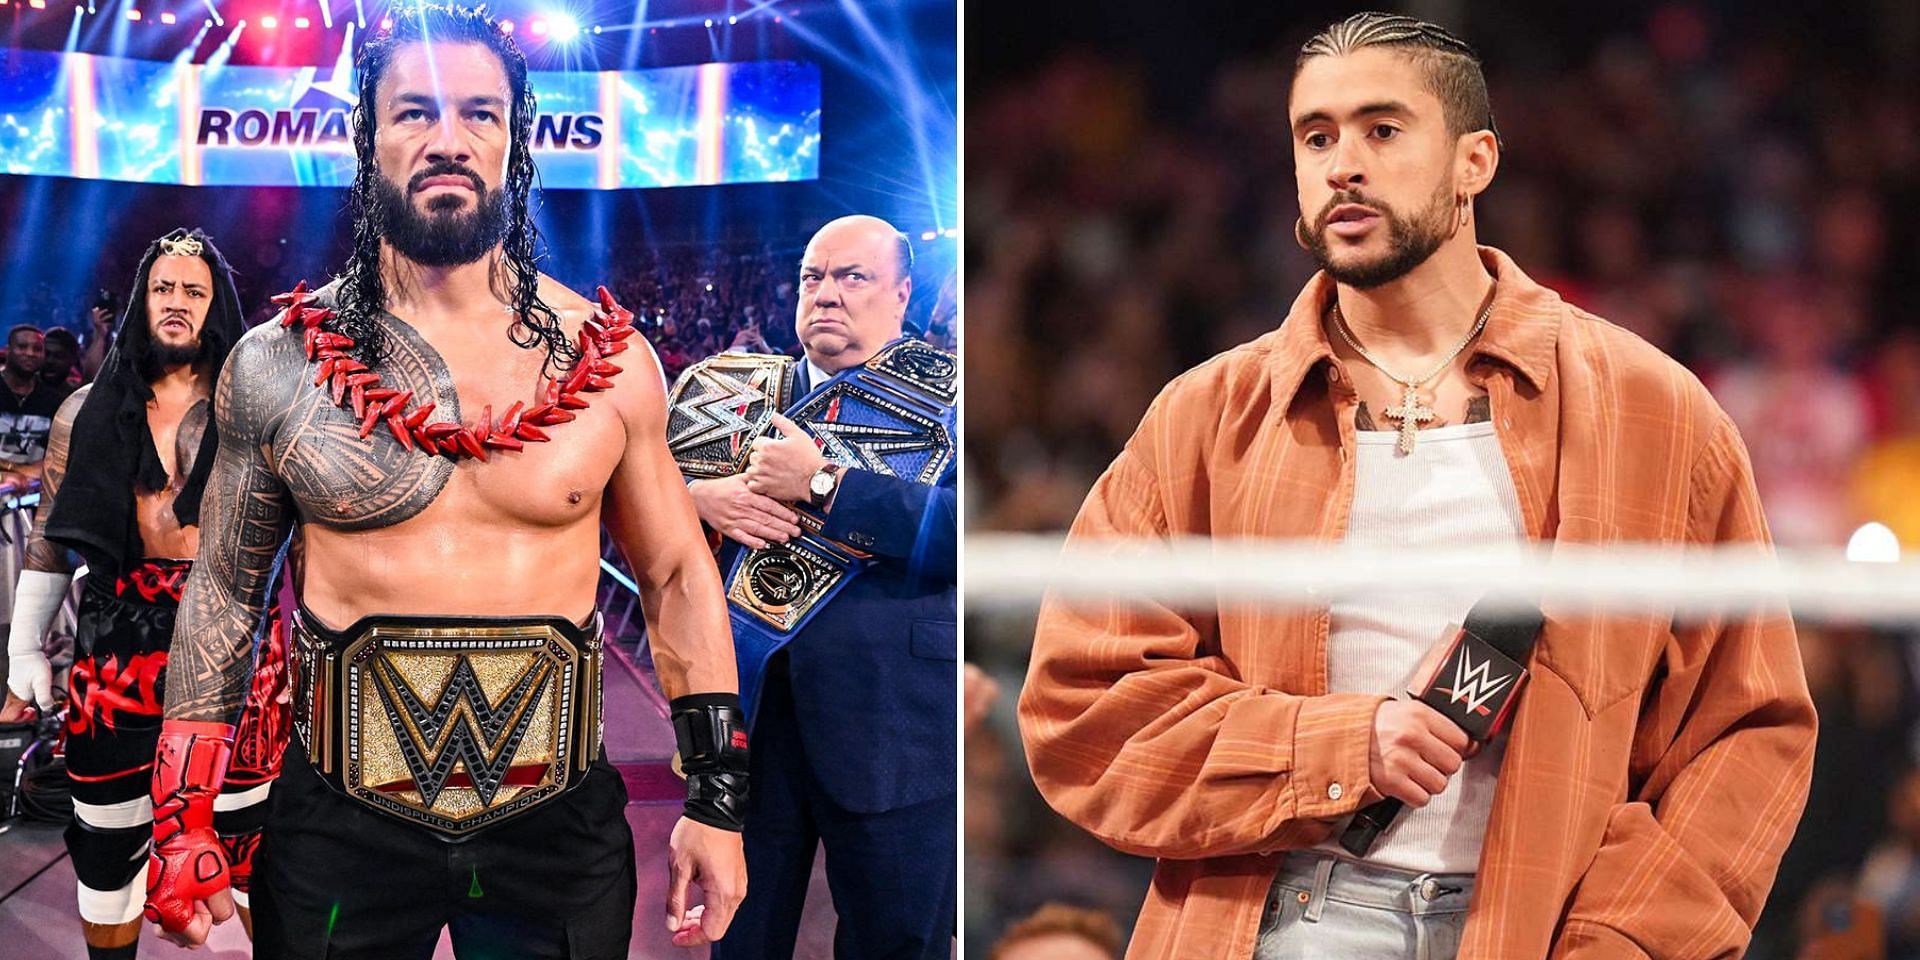 Bloodline member responds to Bad Bunny vowing to dethrone Roman Reigns